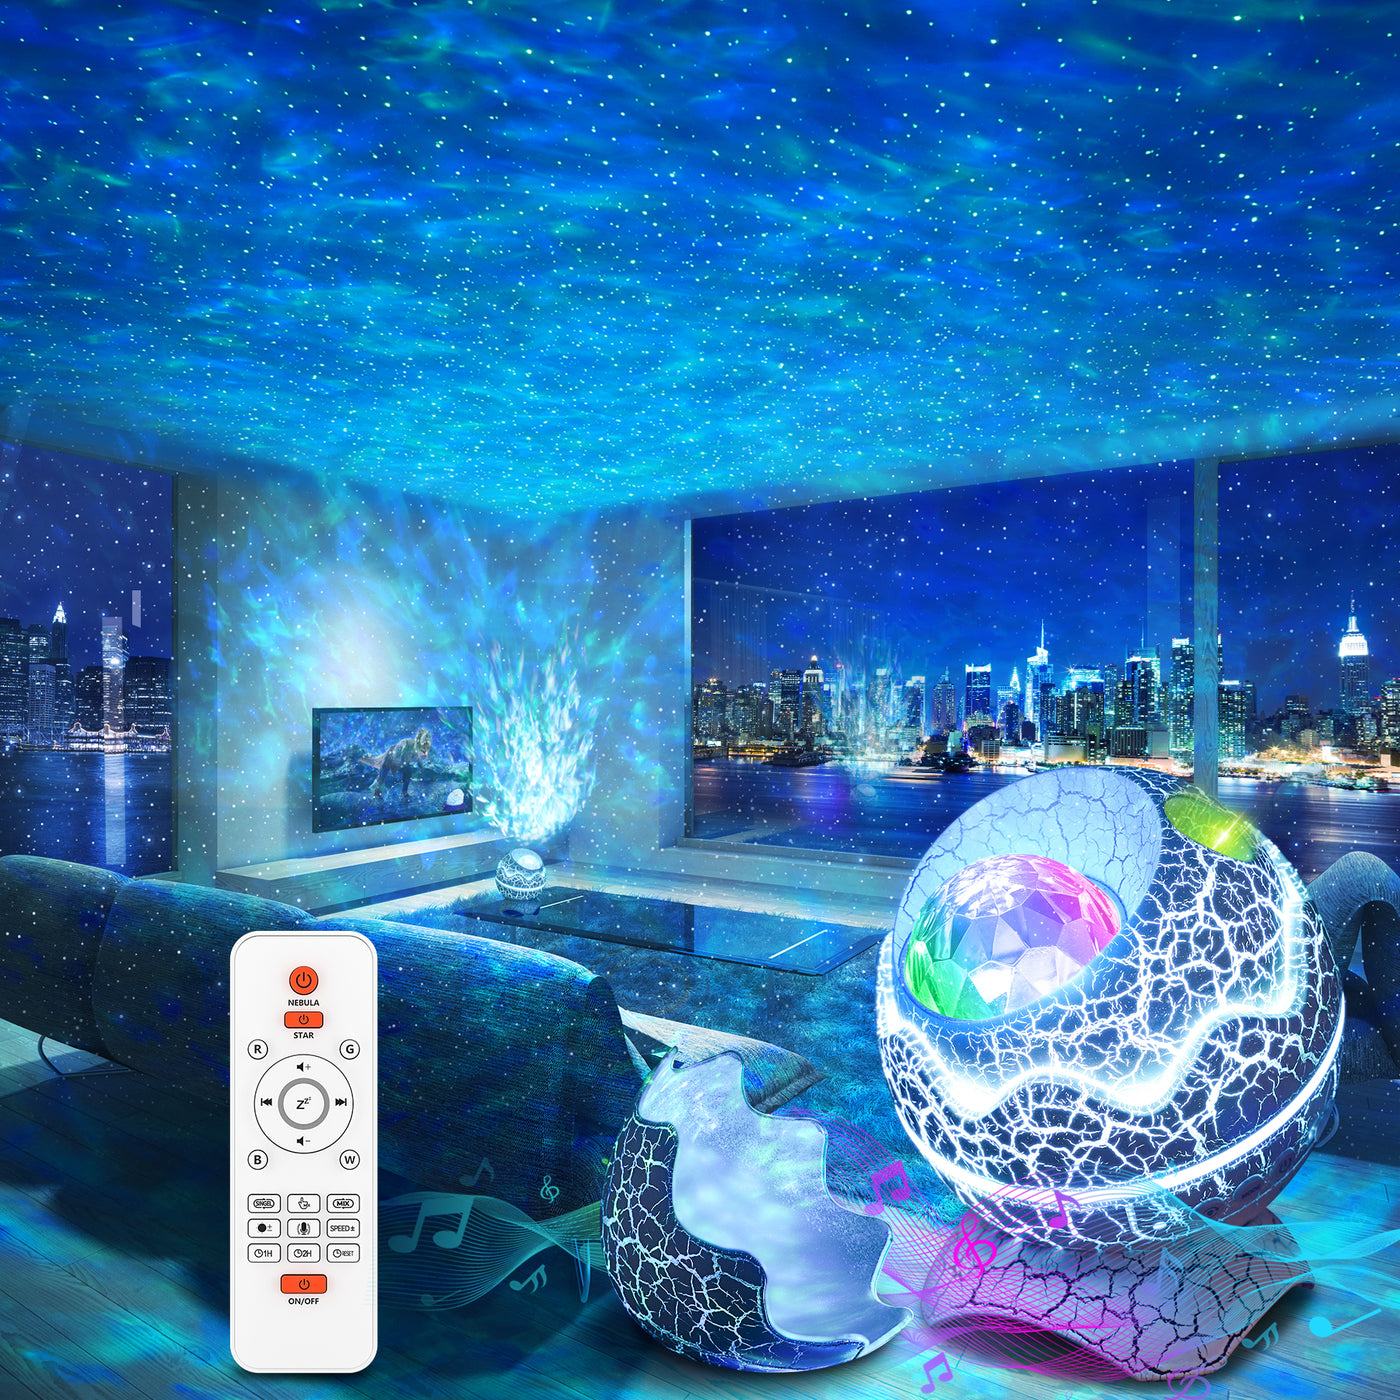 Star Projector in Galaxy Night Light Projector with White Noise and Bluetooth Speaker for Home Bedroom Decor, Remote Control, Christmas Birthday G - 1